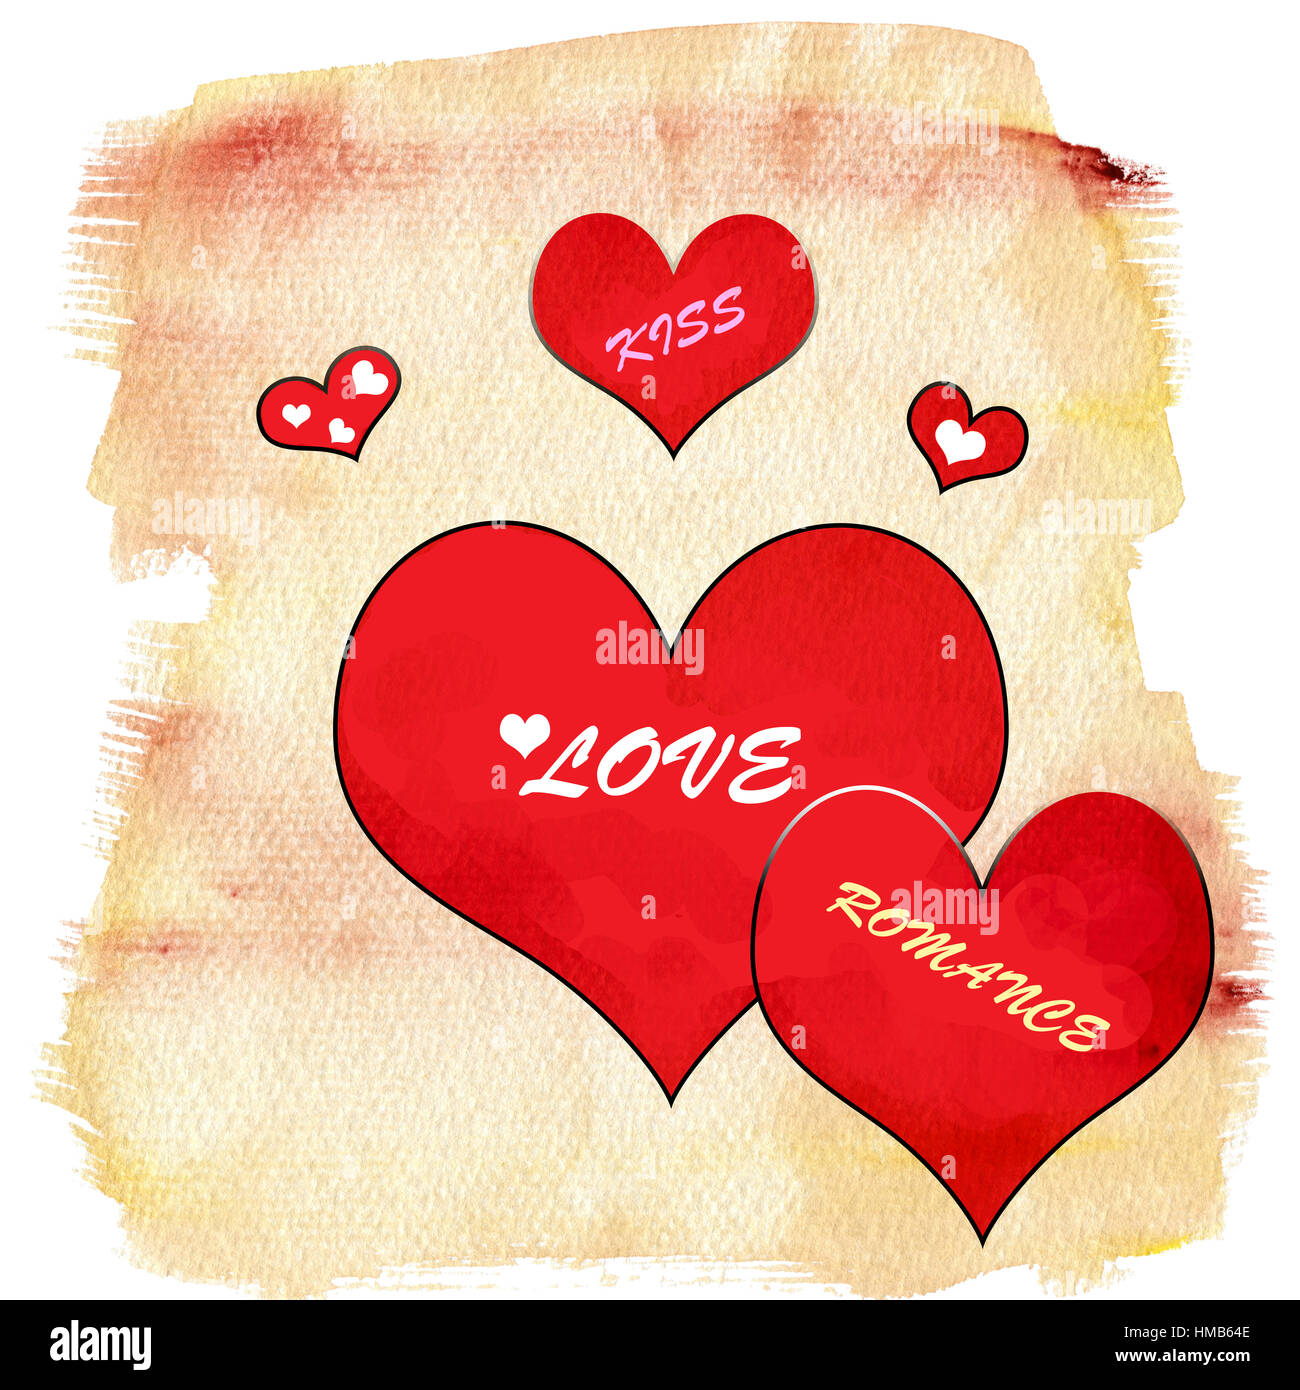 Illustration of Valentine hearts featuring love, romance, and kiss. With a textured background. Stock Photo